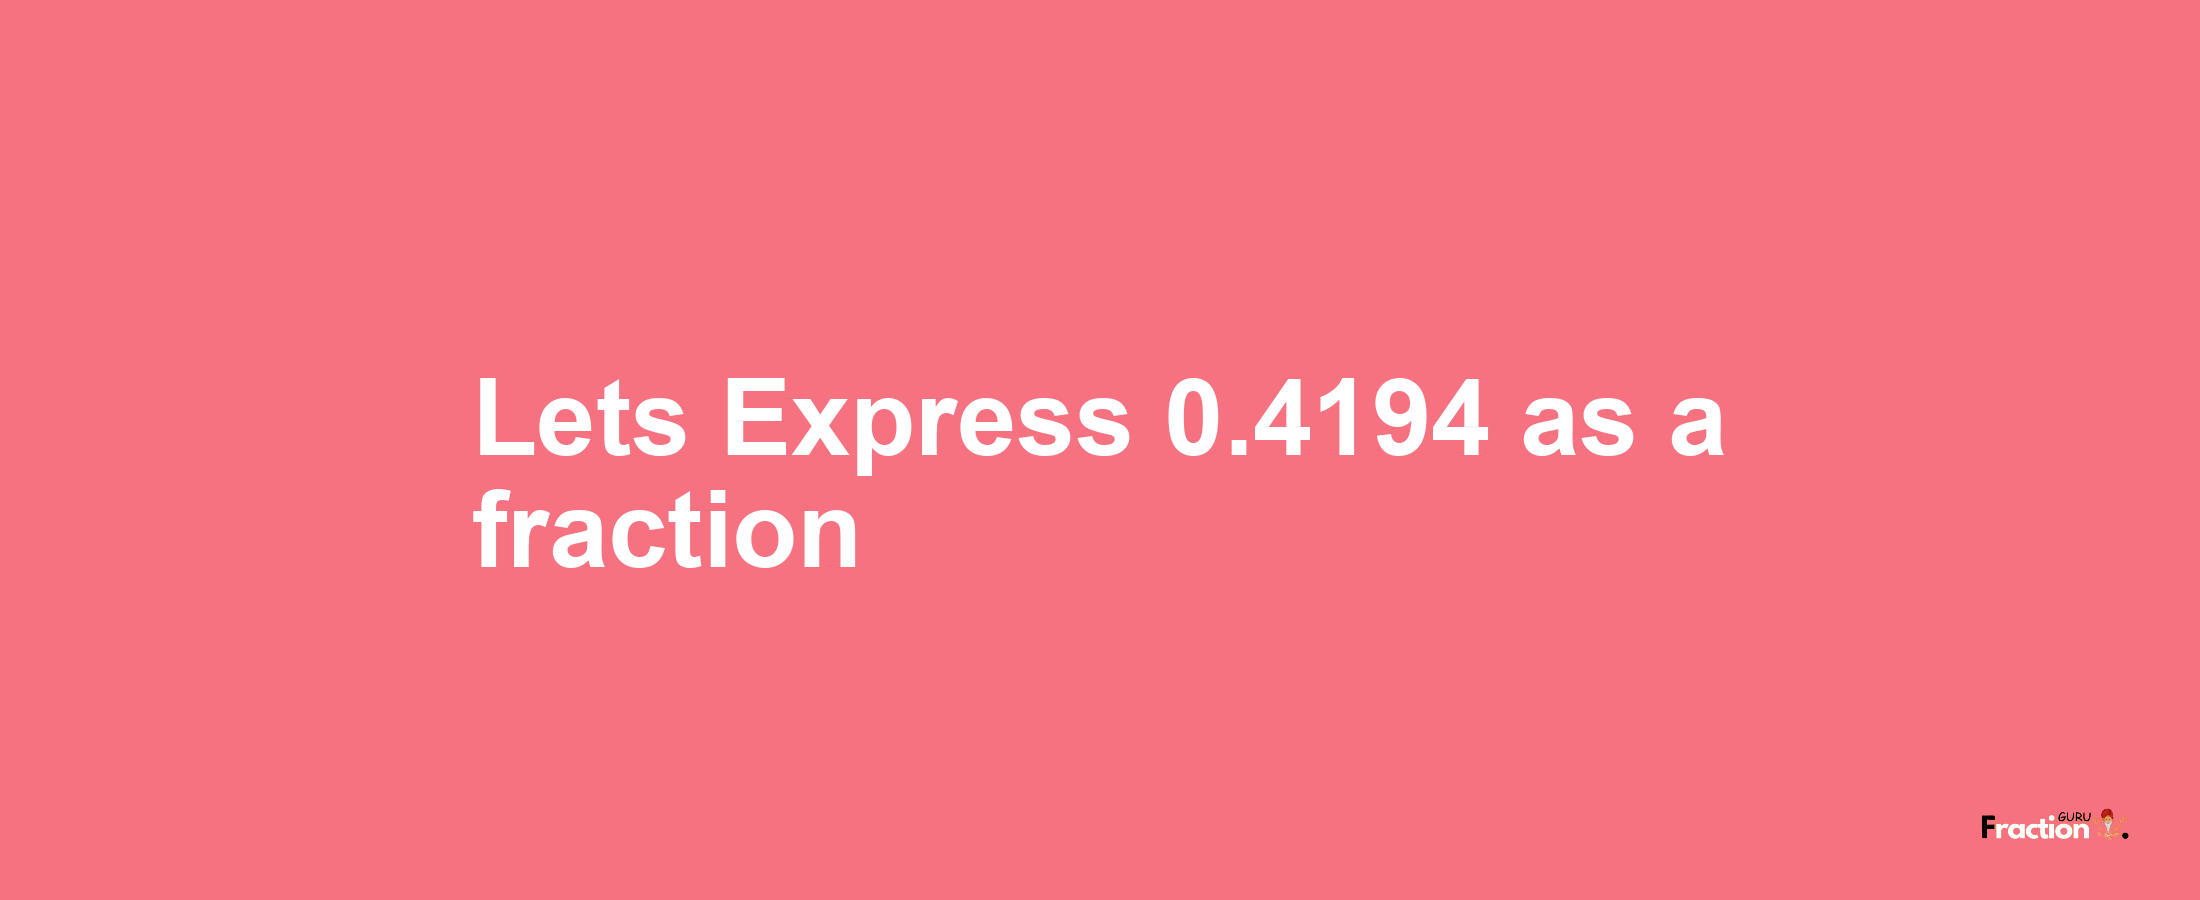 Lets Express 0.4194 as afraction